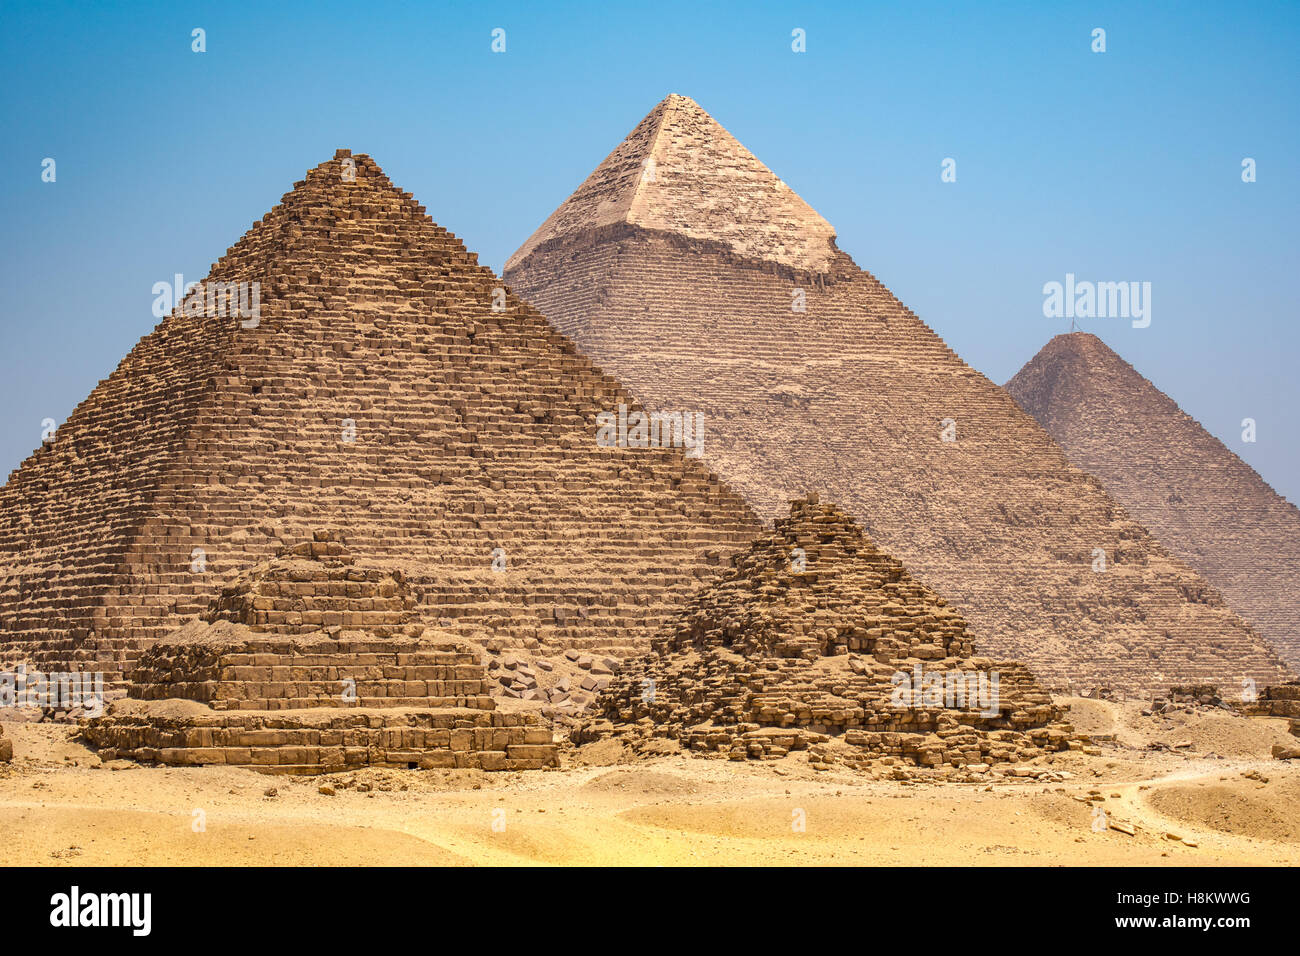 Cairo, Egypt The three Great pyramids of Giza against a clear blue sky. From left to right stands the Pyramid of Mekaure (smalle Stock Photo